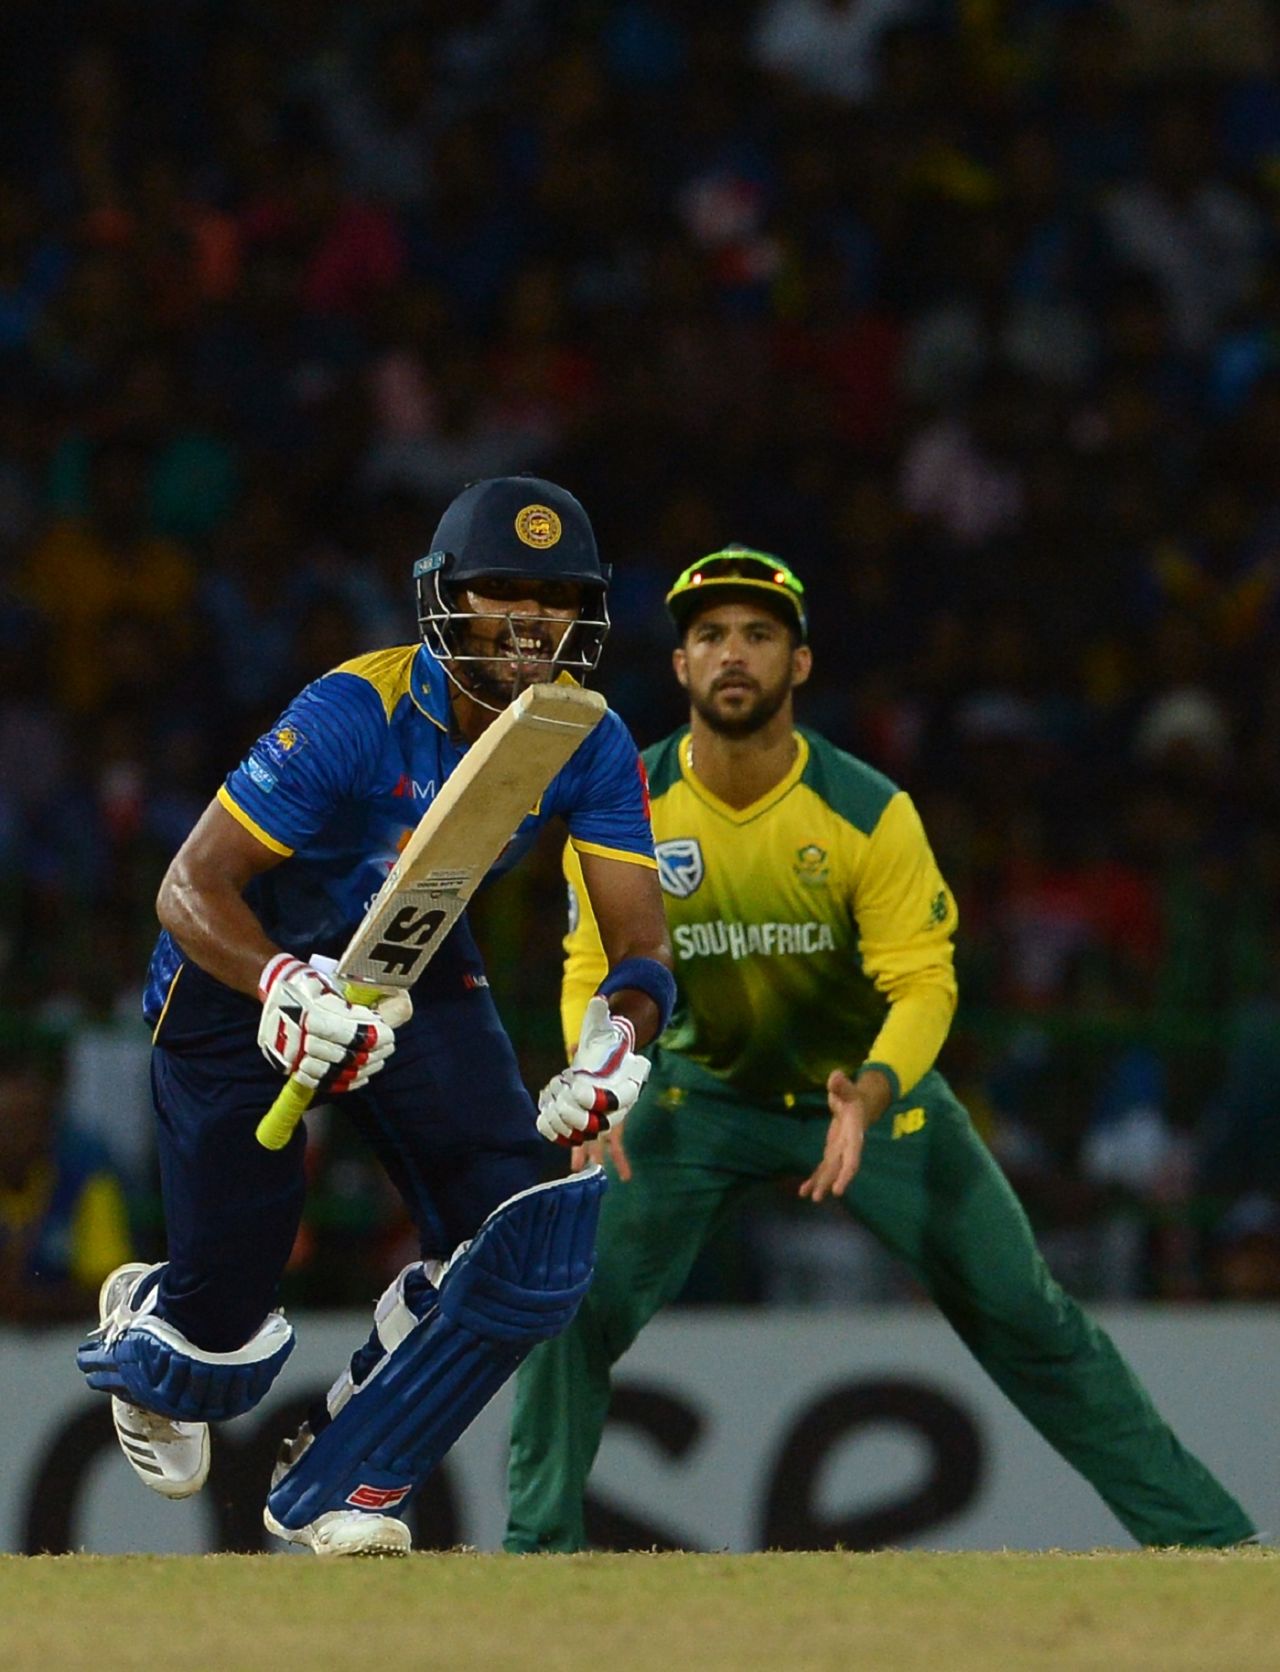 Dinesh Chandimal sets off for a run, Sri Lanka v South Africa, Only T20I, Colombo, August 14, 2018